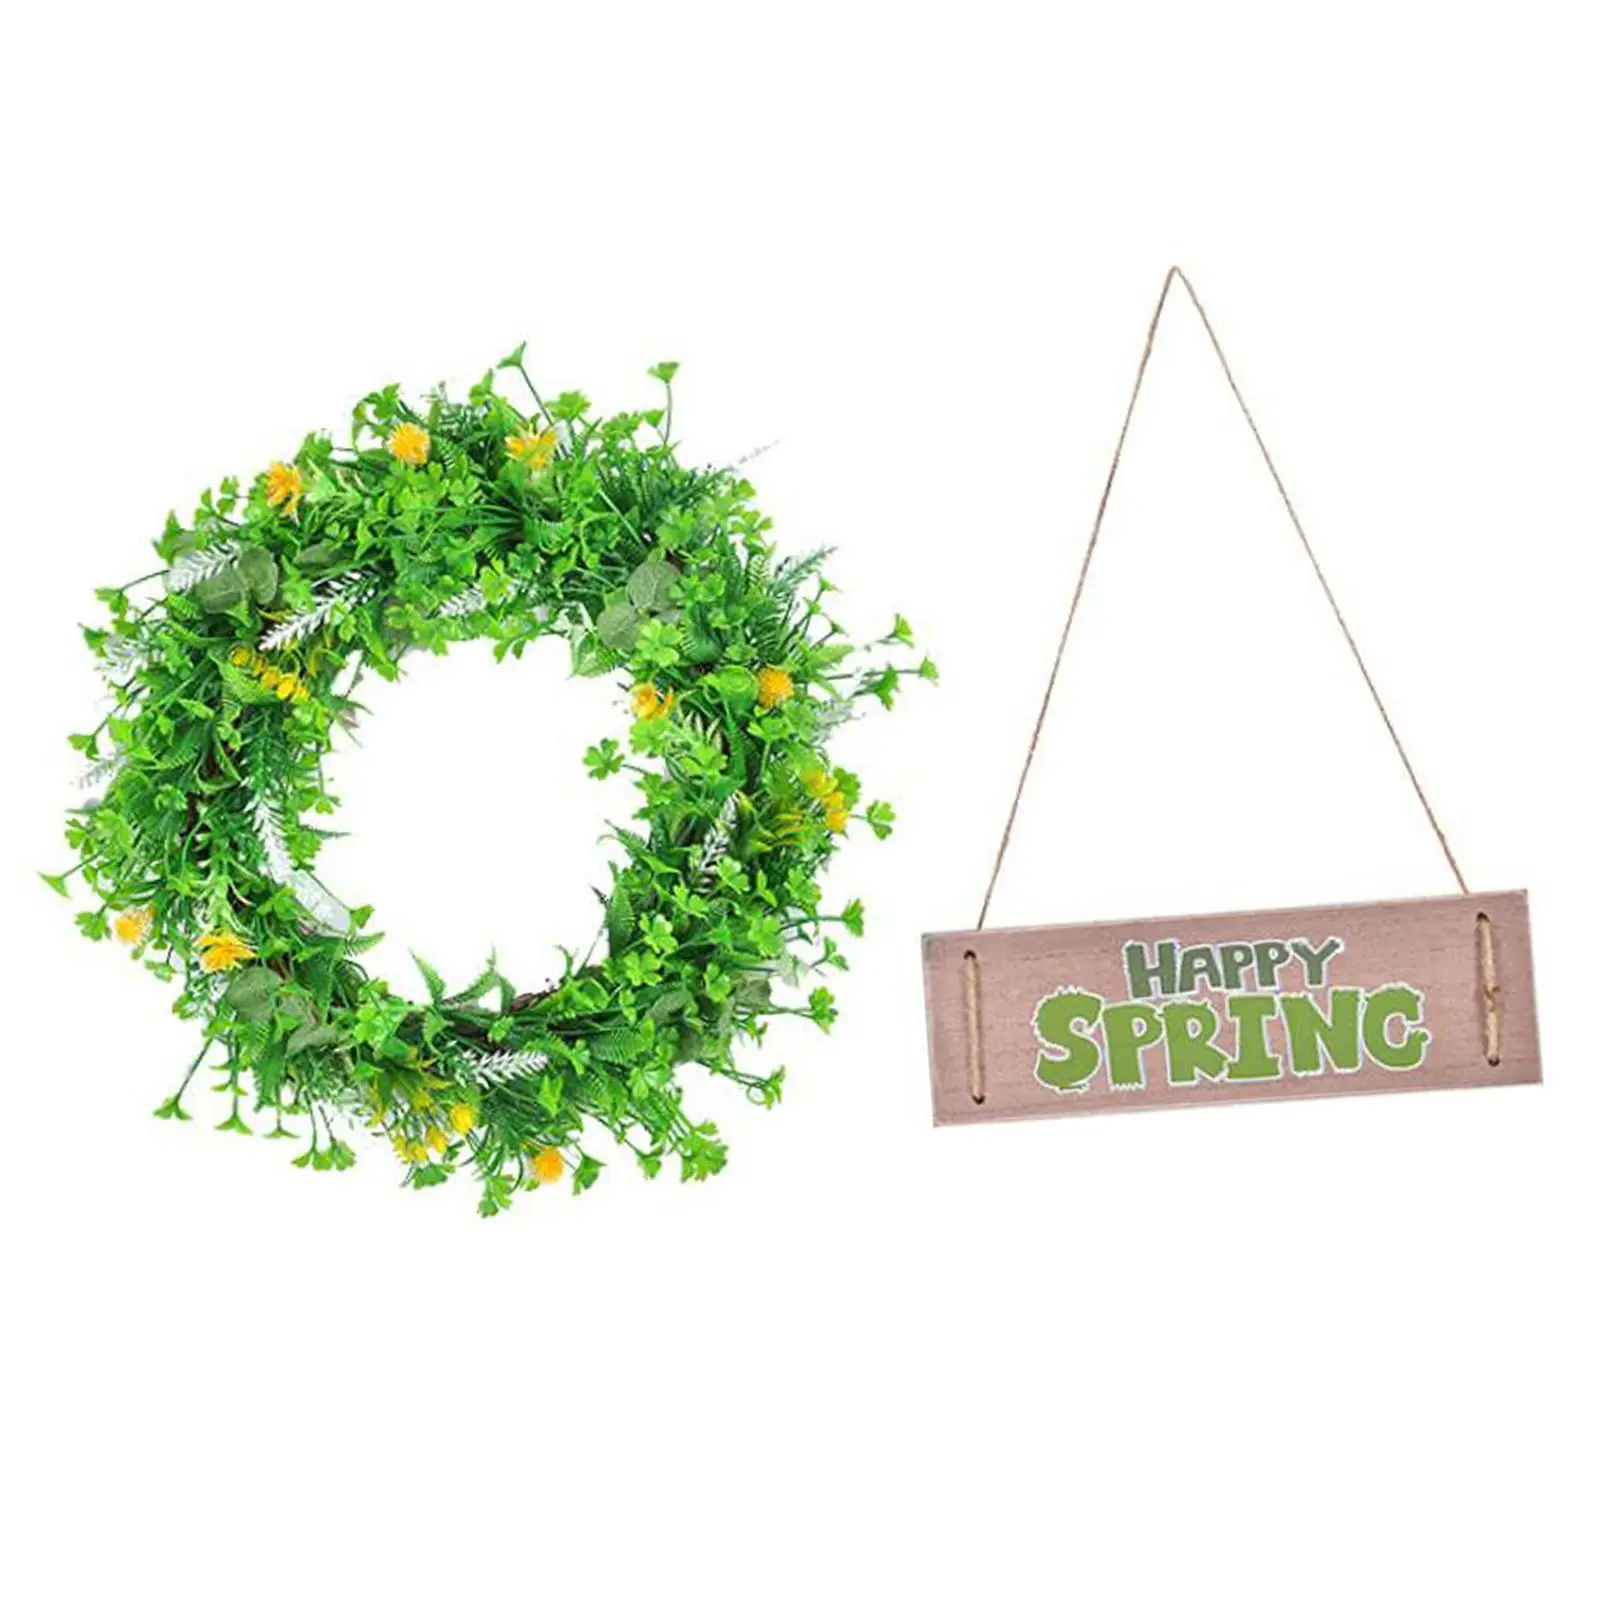 Easter Happy Spring Greenery Wreath Pastoral Front Door Hanger Decor Decorative Creative Summer Garland for Anniversary Holidays